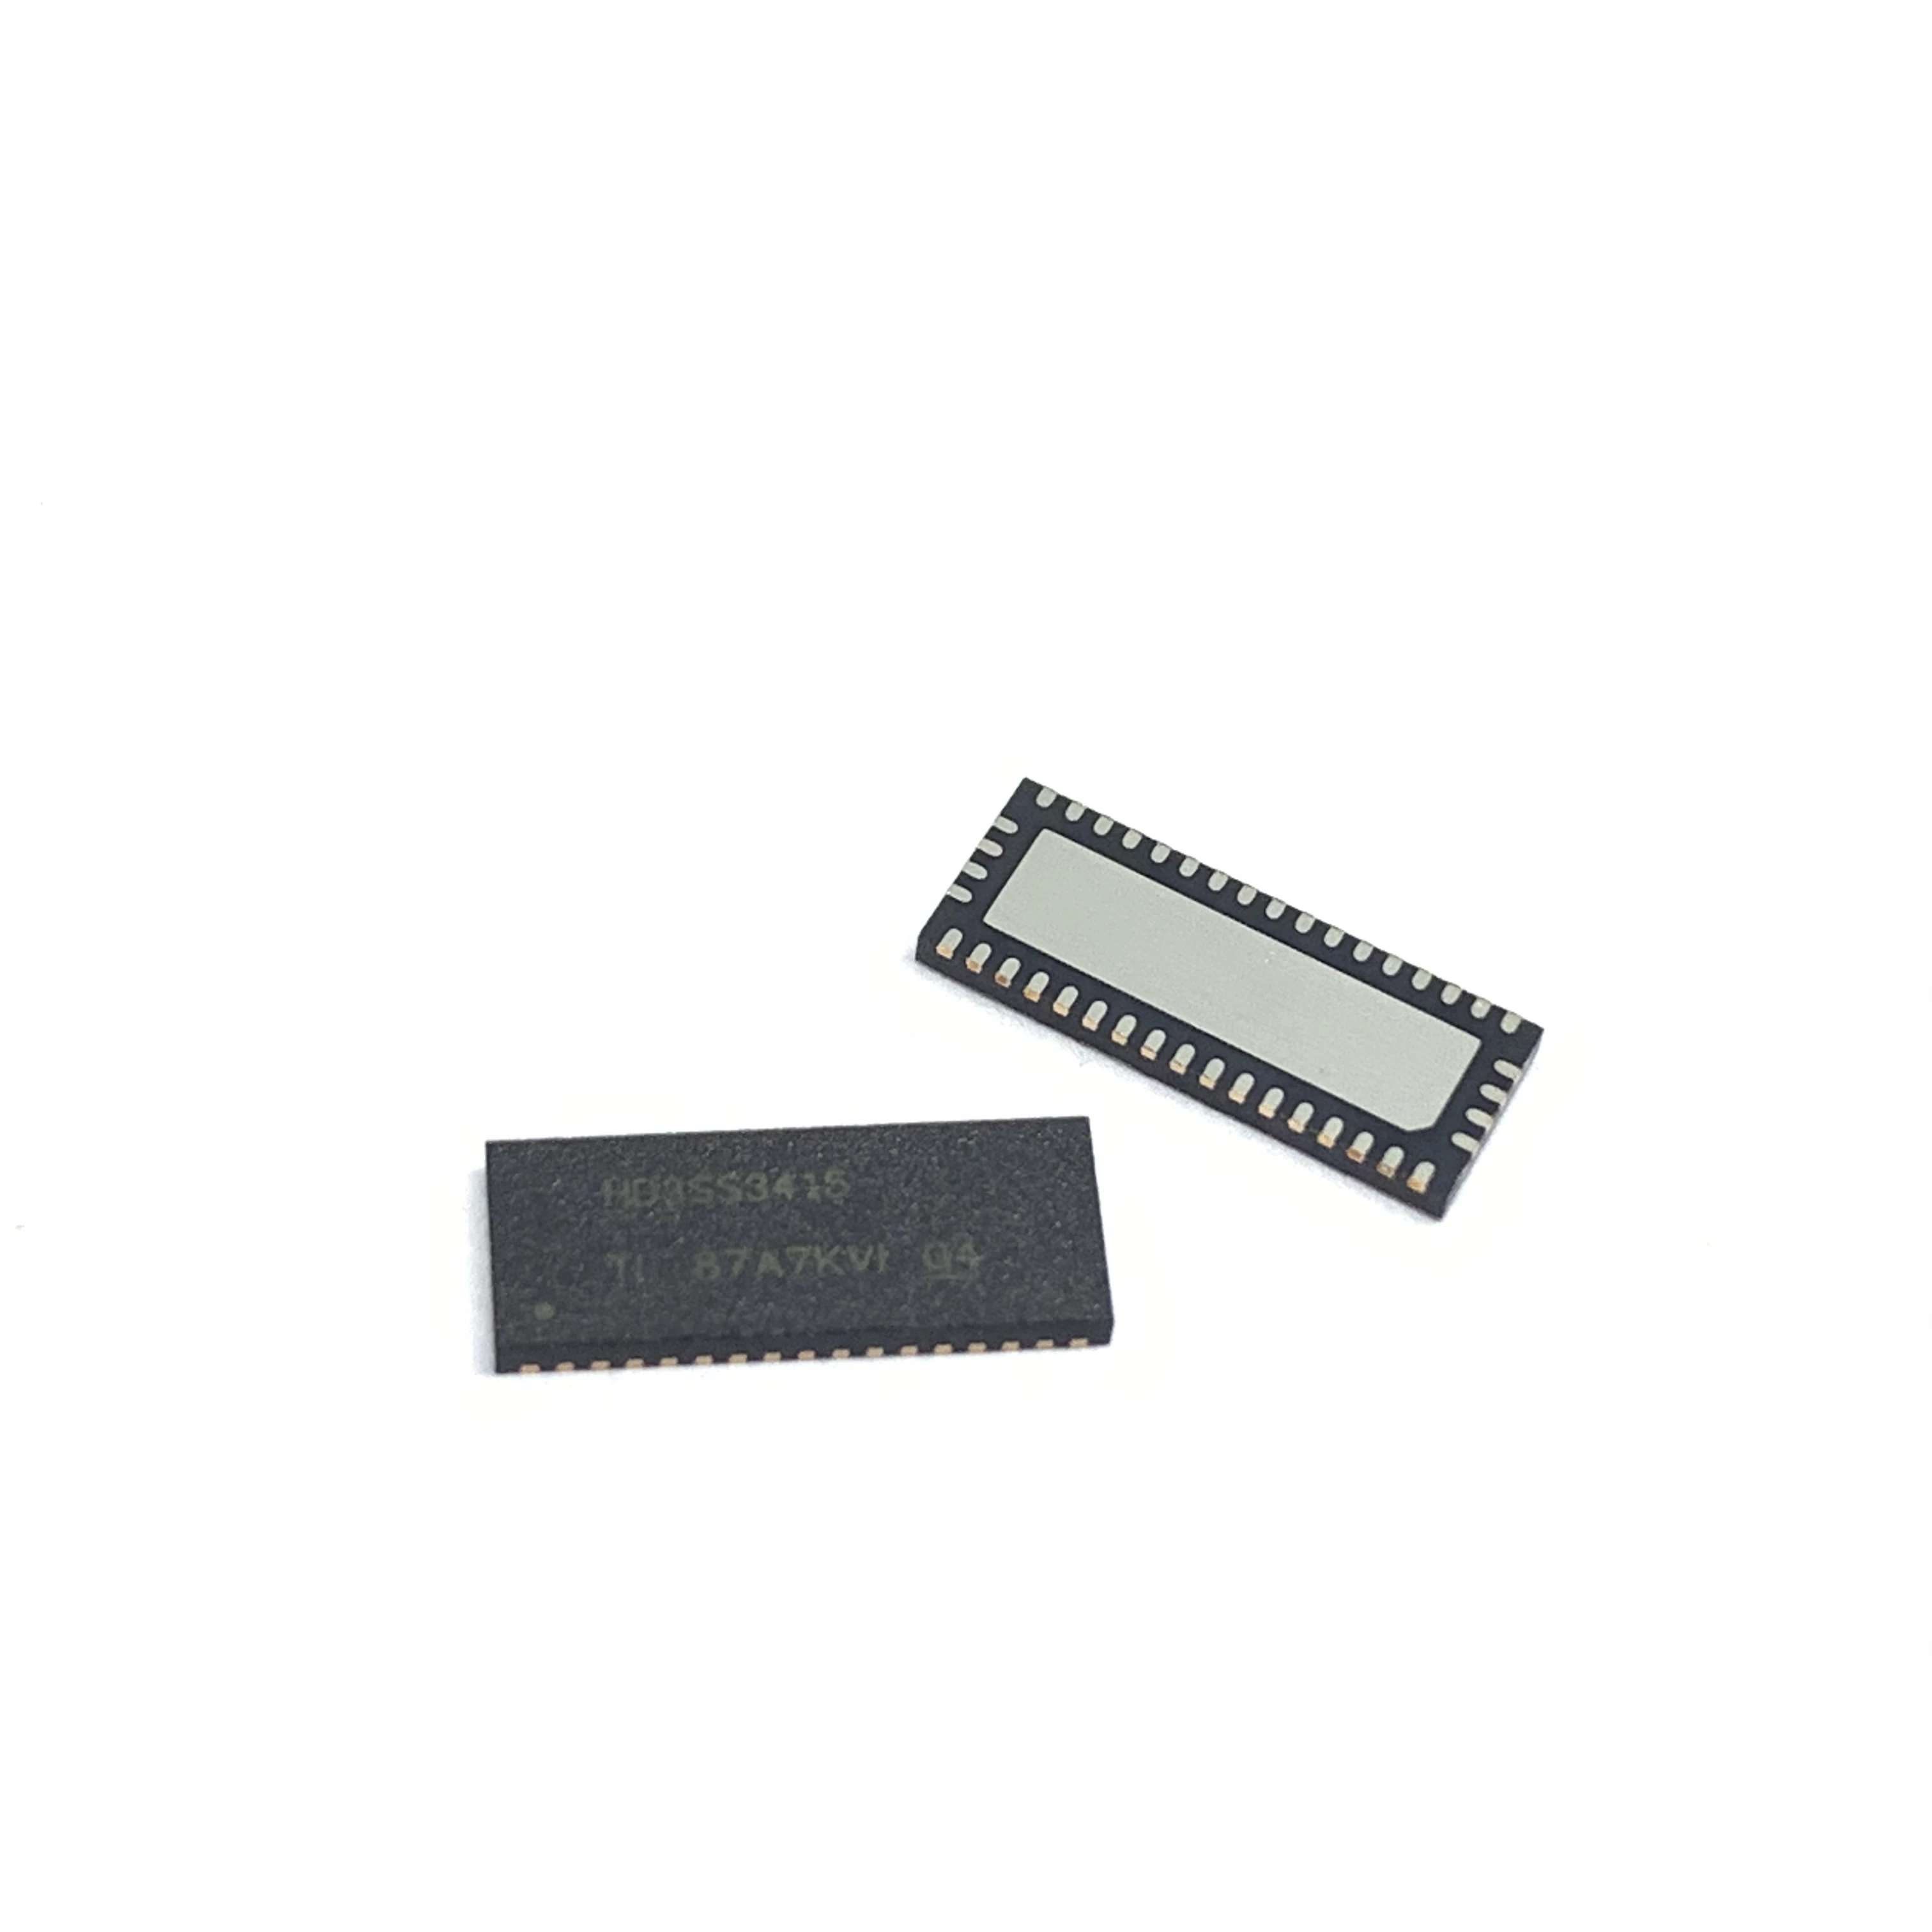 Merrillchip High quality ic chips electronic components Integrated Circuits Interface Analog Switches HD3SS3415